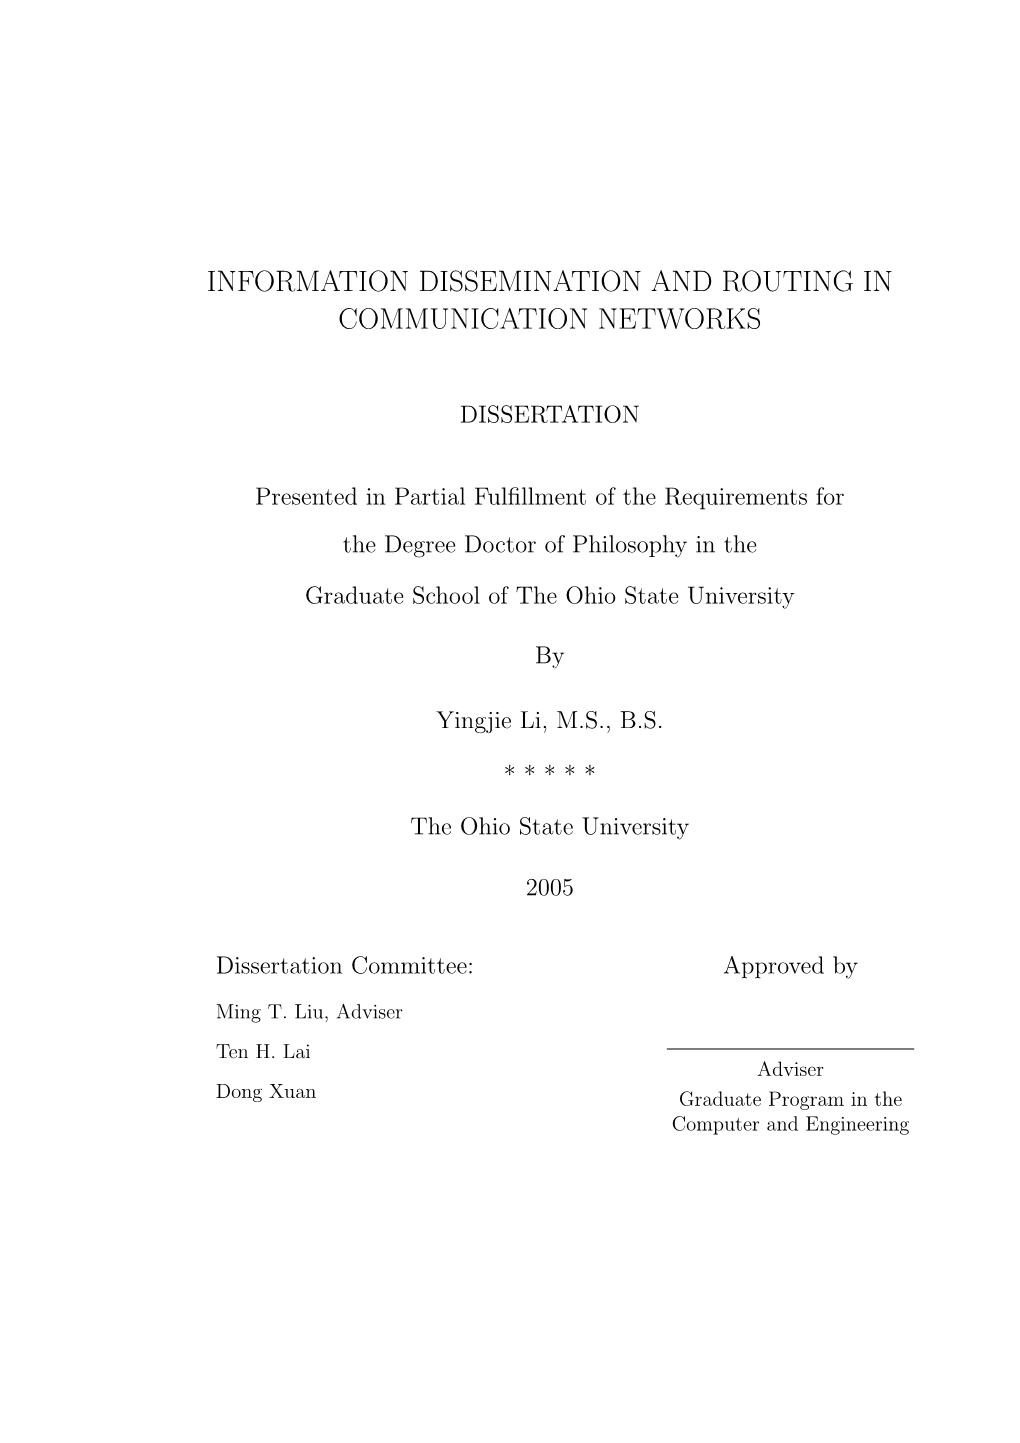 Information Dissemination and Routing in Communication Networks